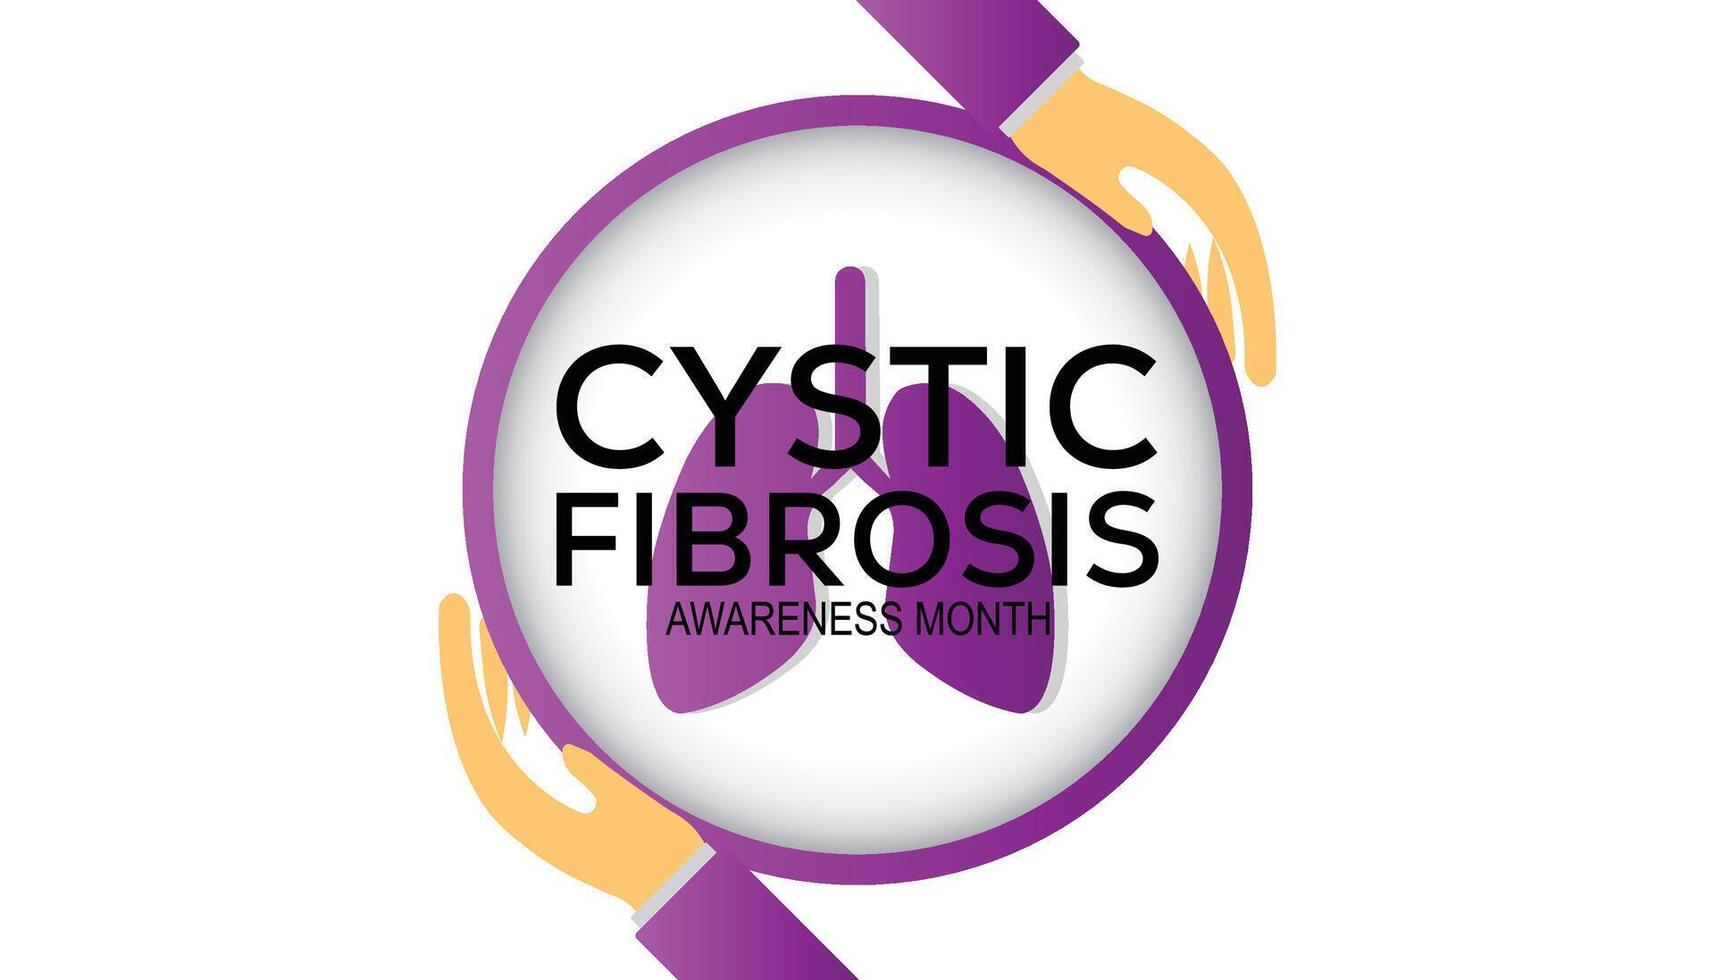 Cystic Fibrosis Awareness Month observed every year in May. Template for background, banner, card, poster with text inscription. vector